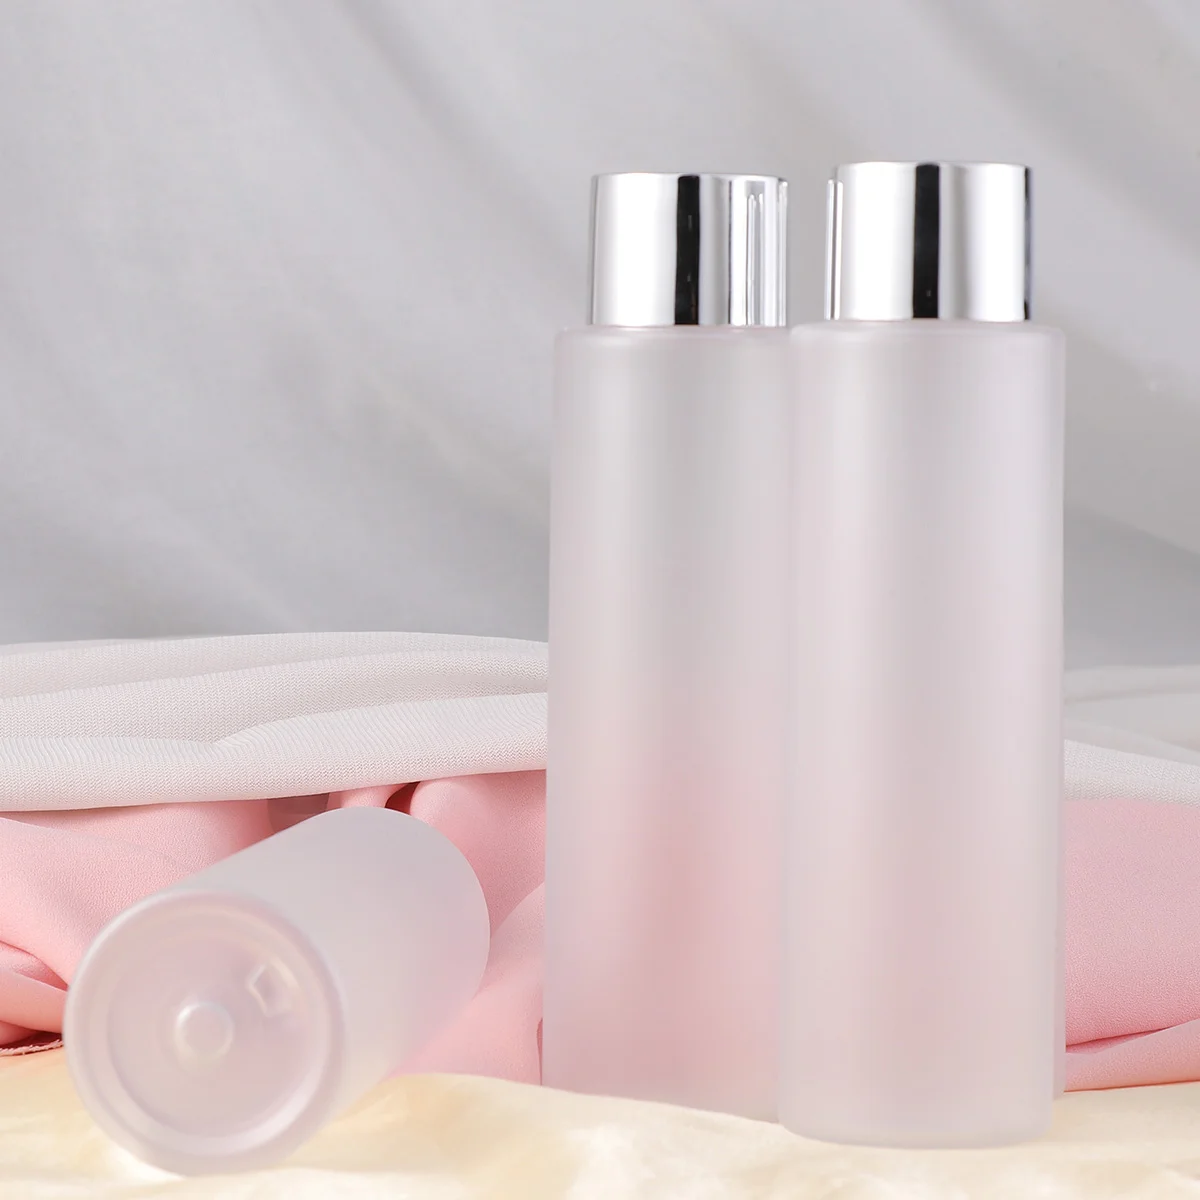 4pcs Refillable Empty Bottle Vial Jar Pot Lotion Shower Shampoo Storage Container With Cap For Home Travel 200ml сухой шампунь для волос классик dry shampoo with fresh fragrance